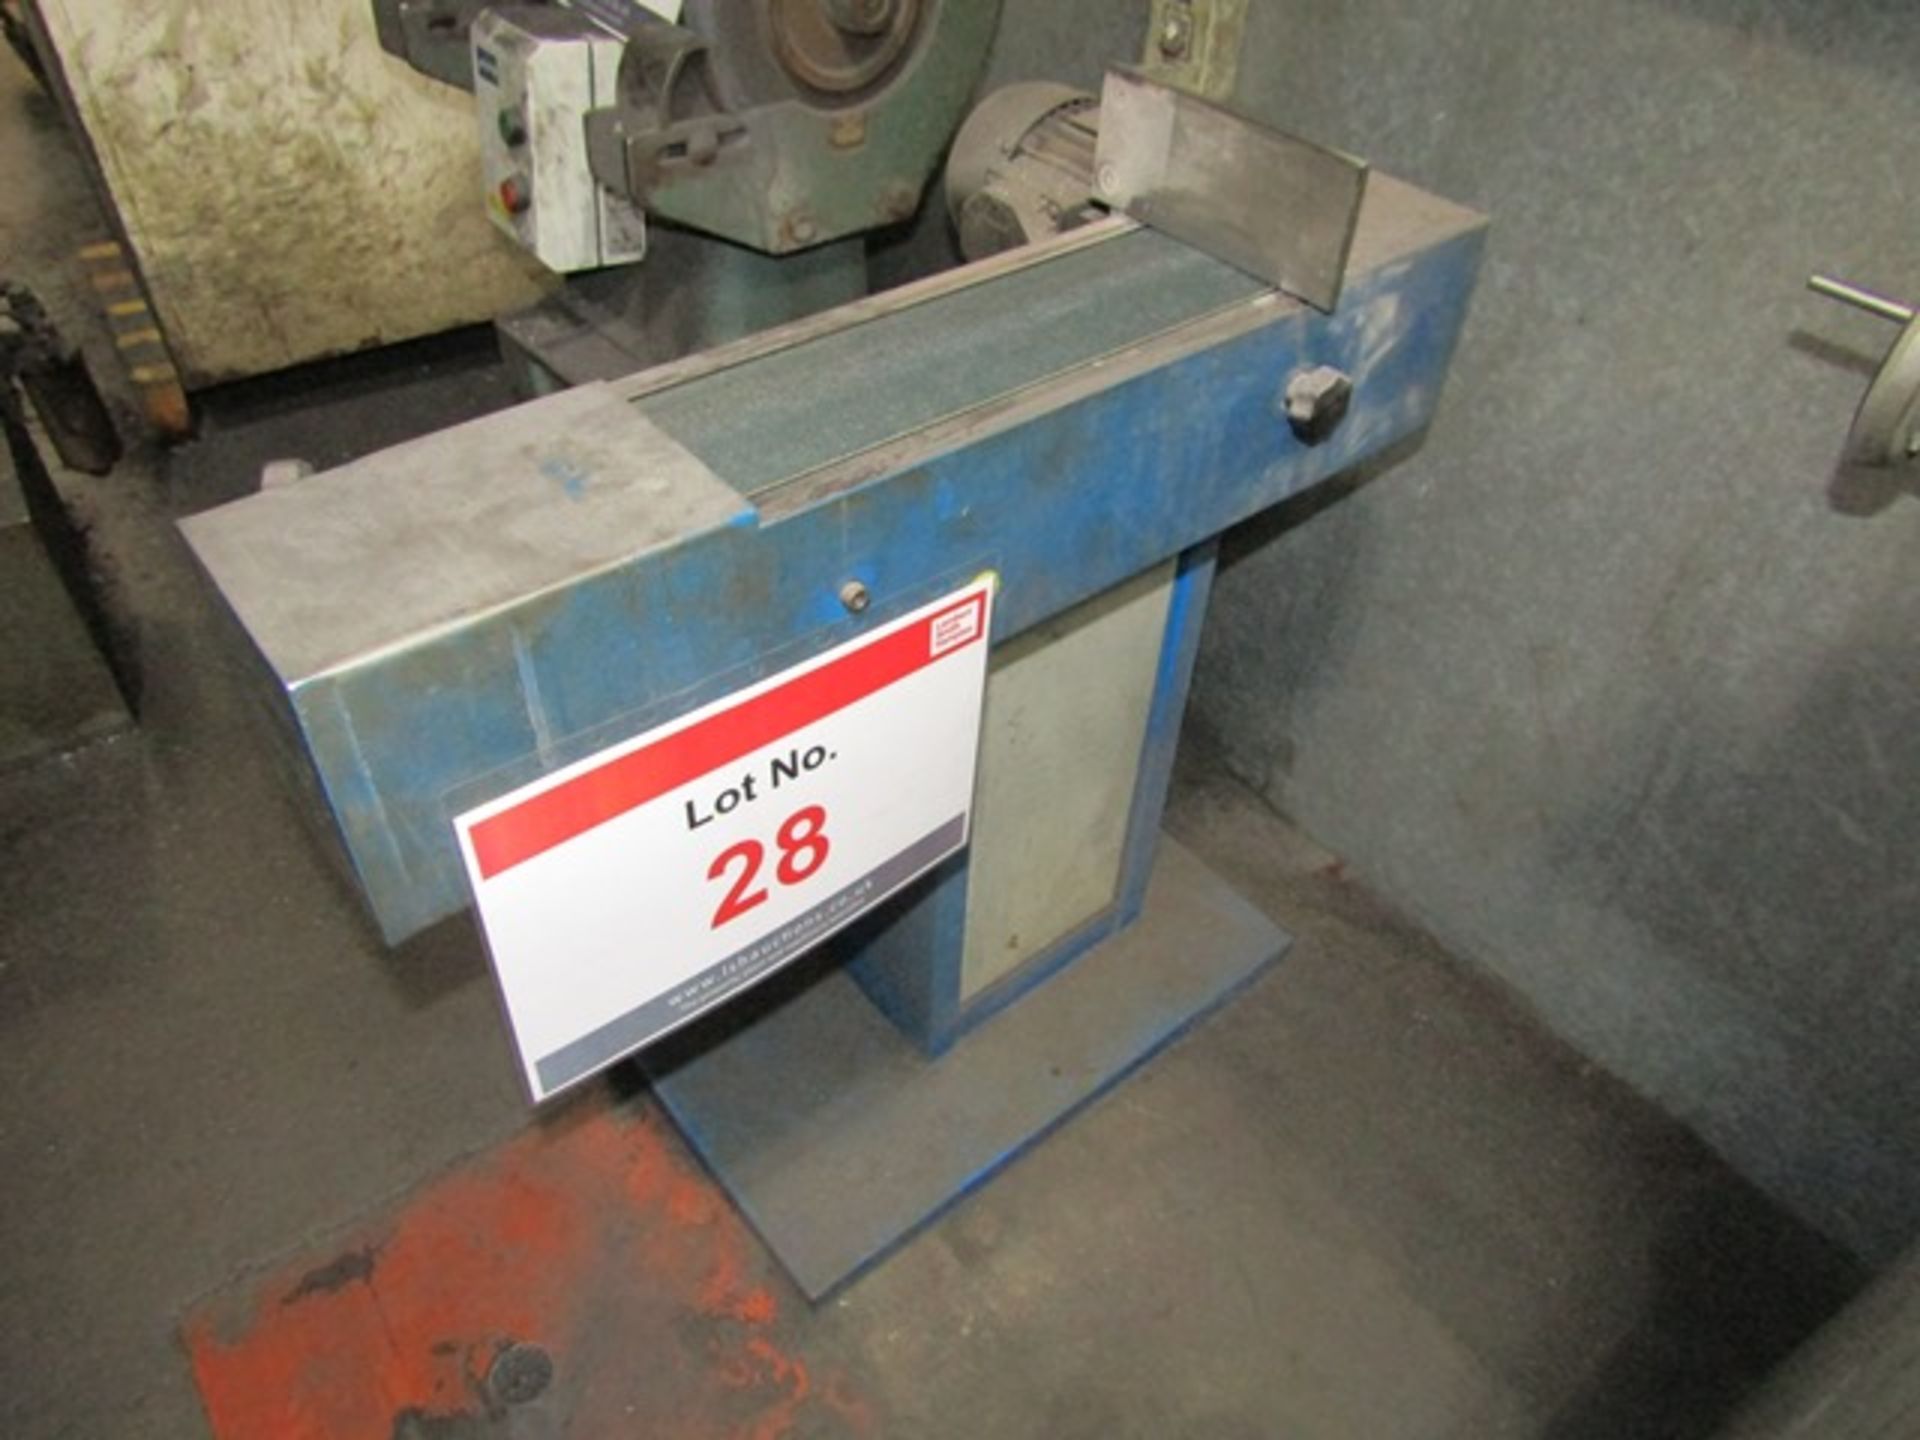 Morrisflex 100mm horizontal continuous belt facer, on stand. (Please note: A work Method Statement